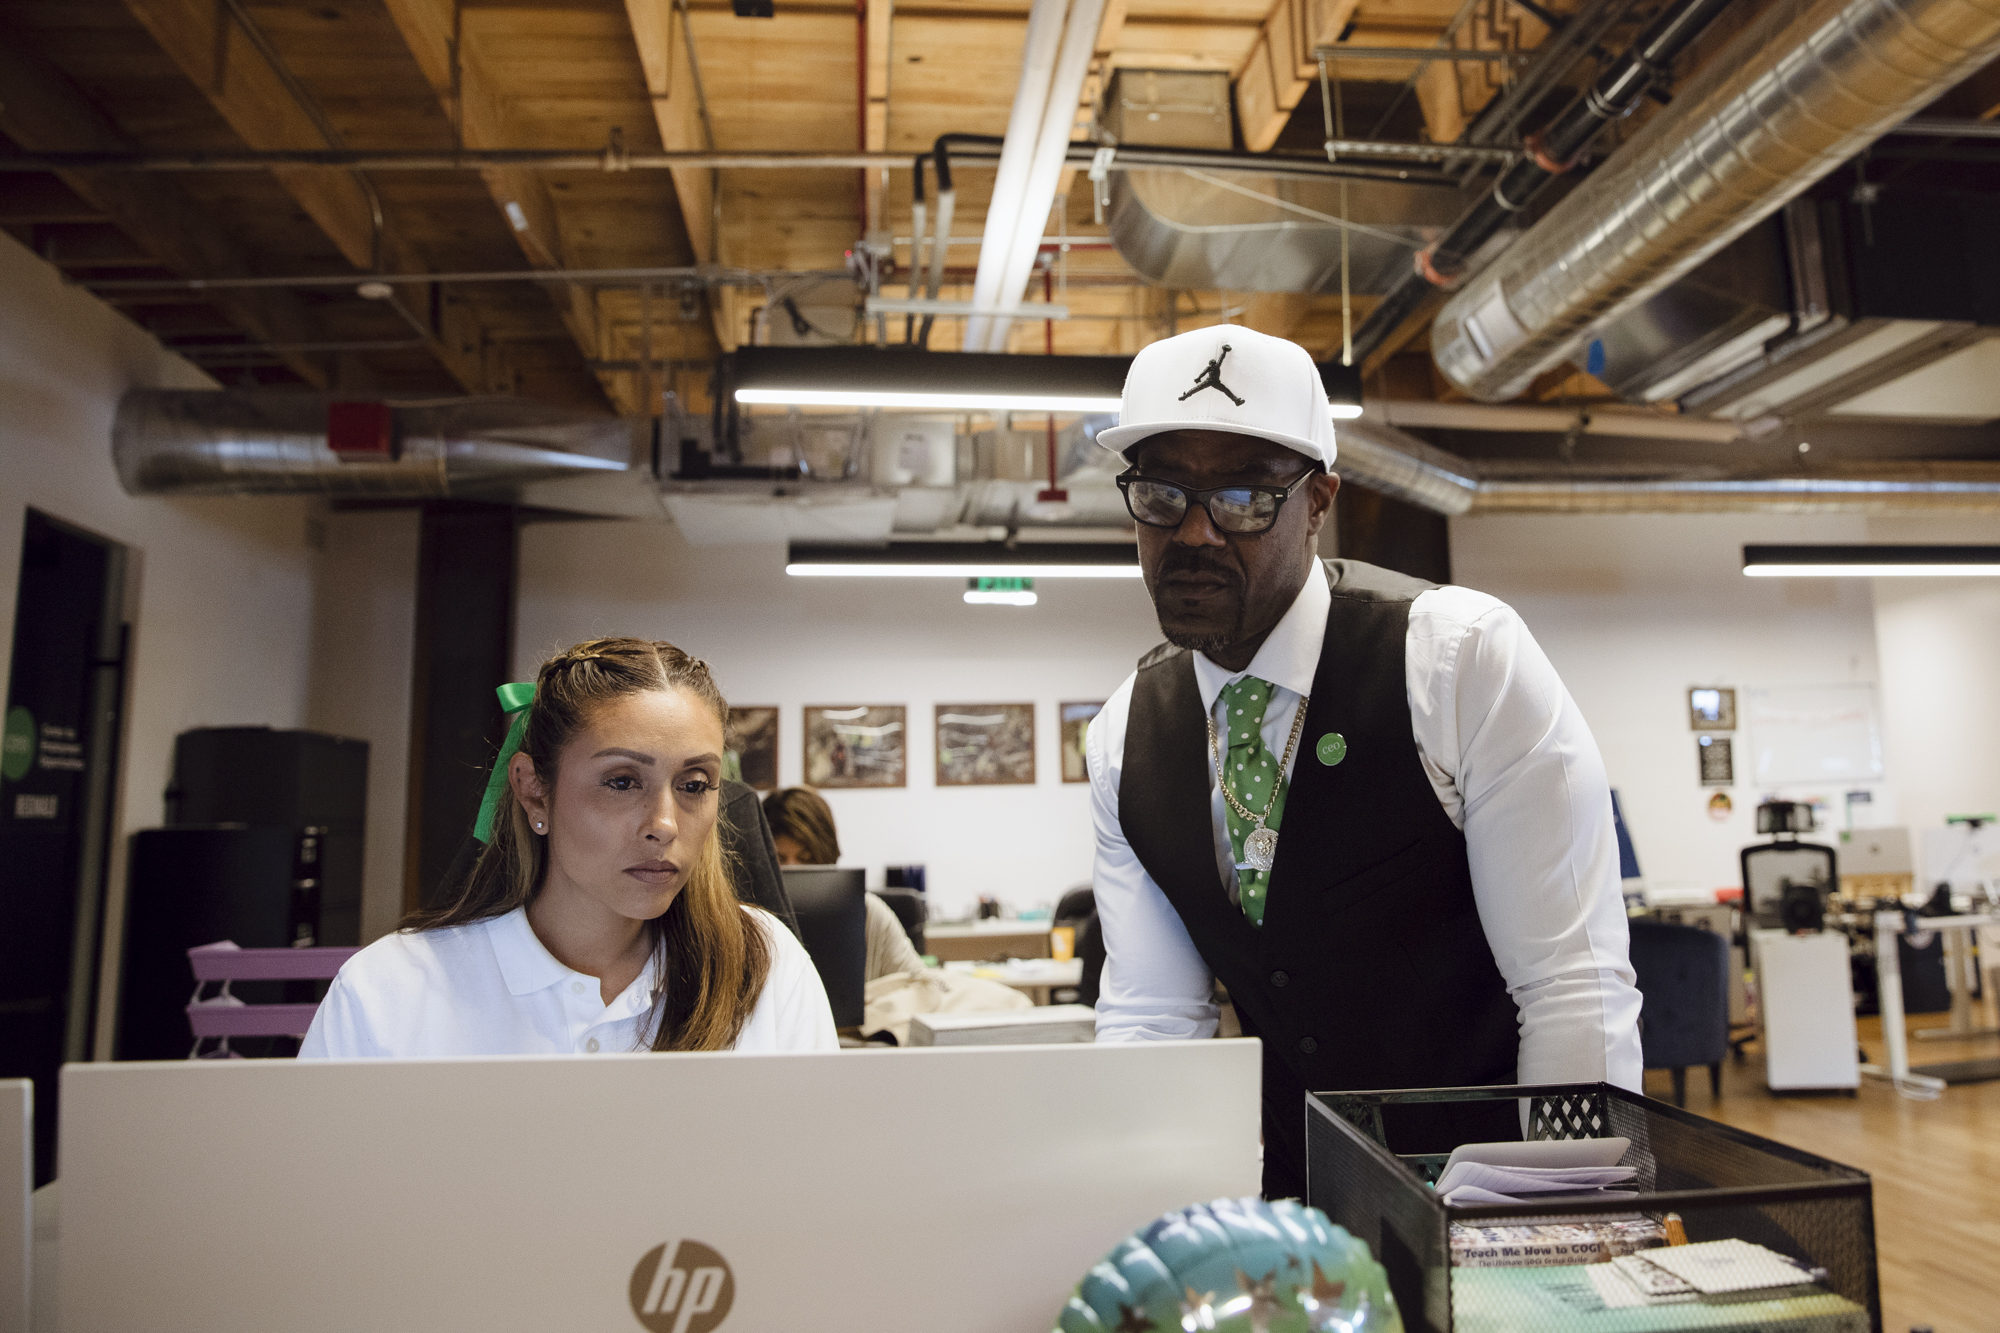 A Black man wearing a white hat, black vest and white shirt stands over a woman wearing a white shirt looking at a desktop screen in a building.